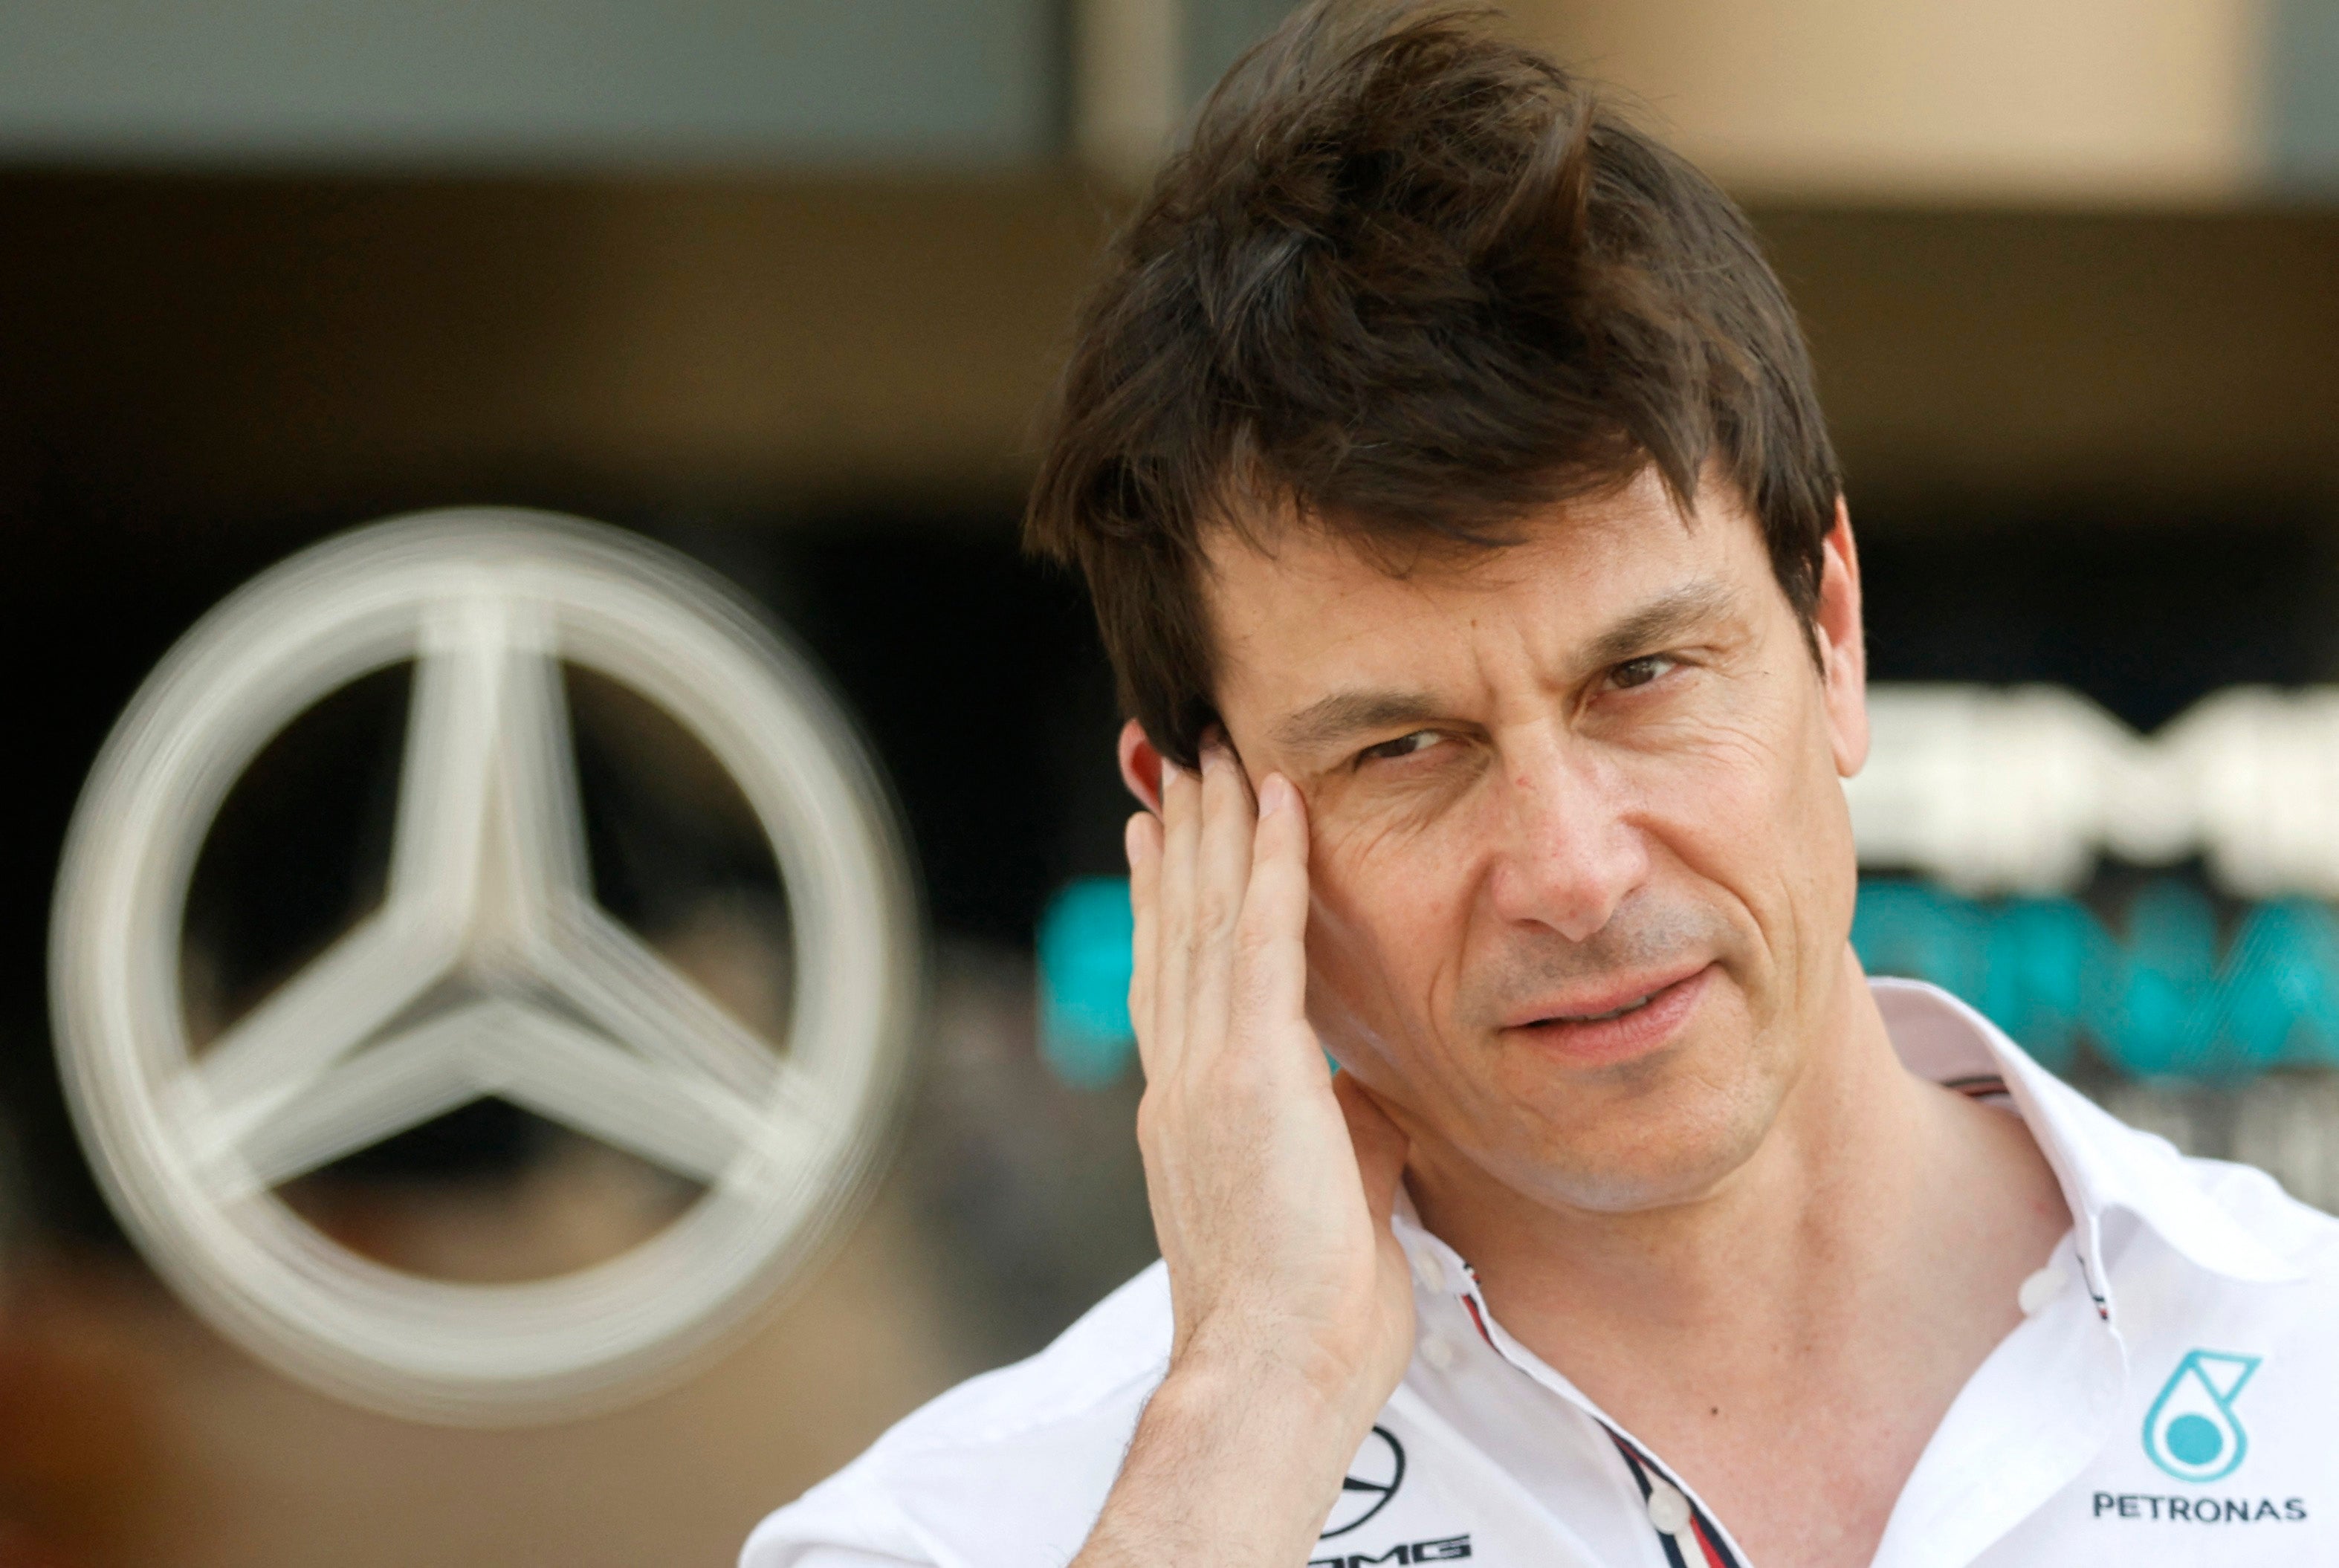 Toto Wolff believes that Mercedes need to make big improvements ahead of the Australian Grand Prix